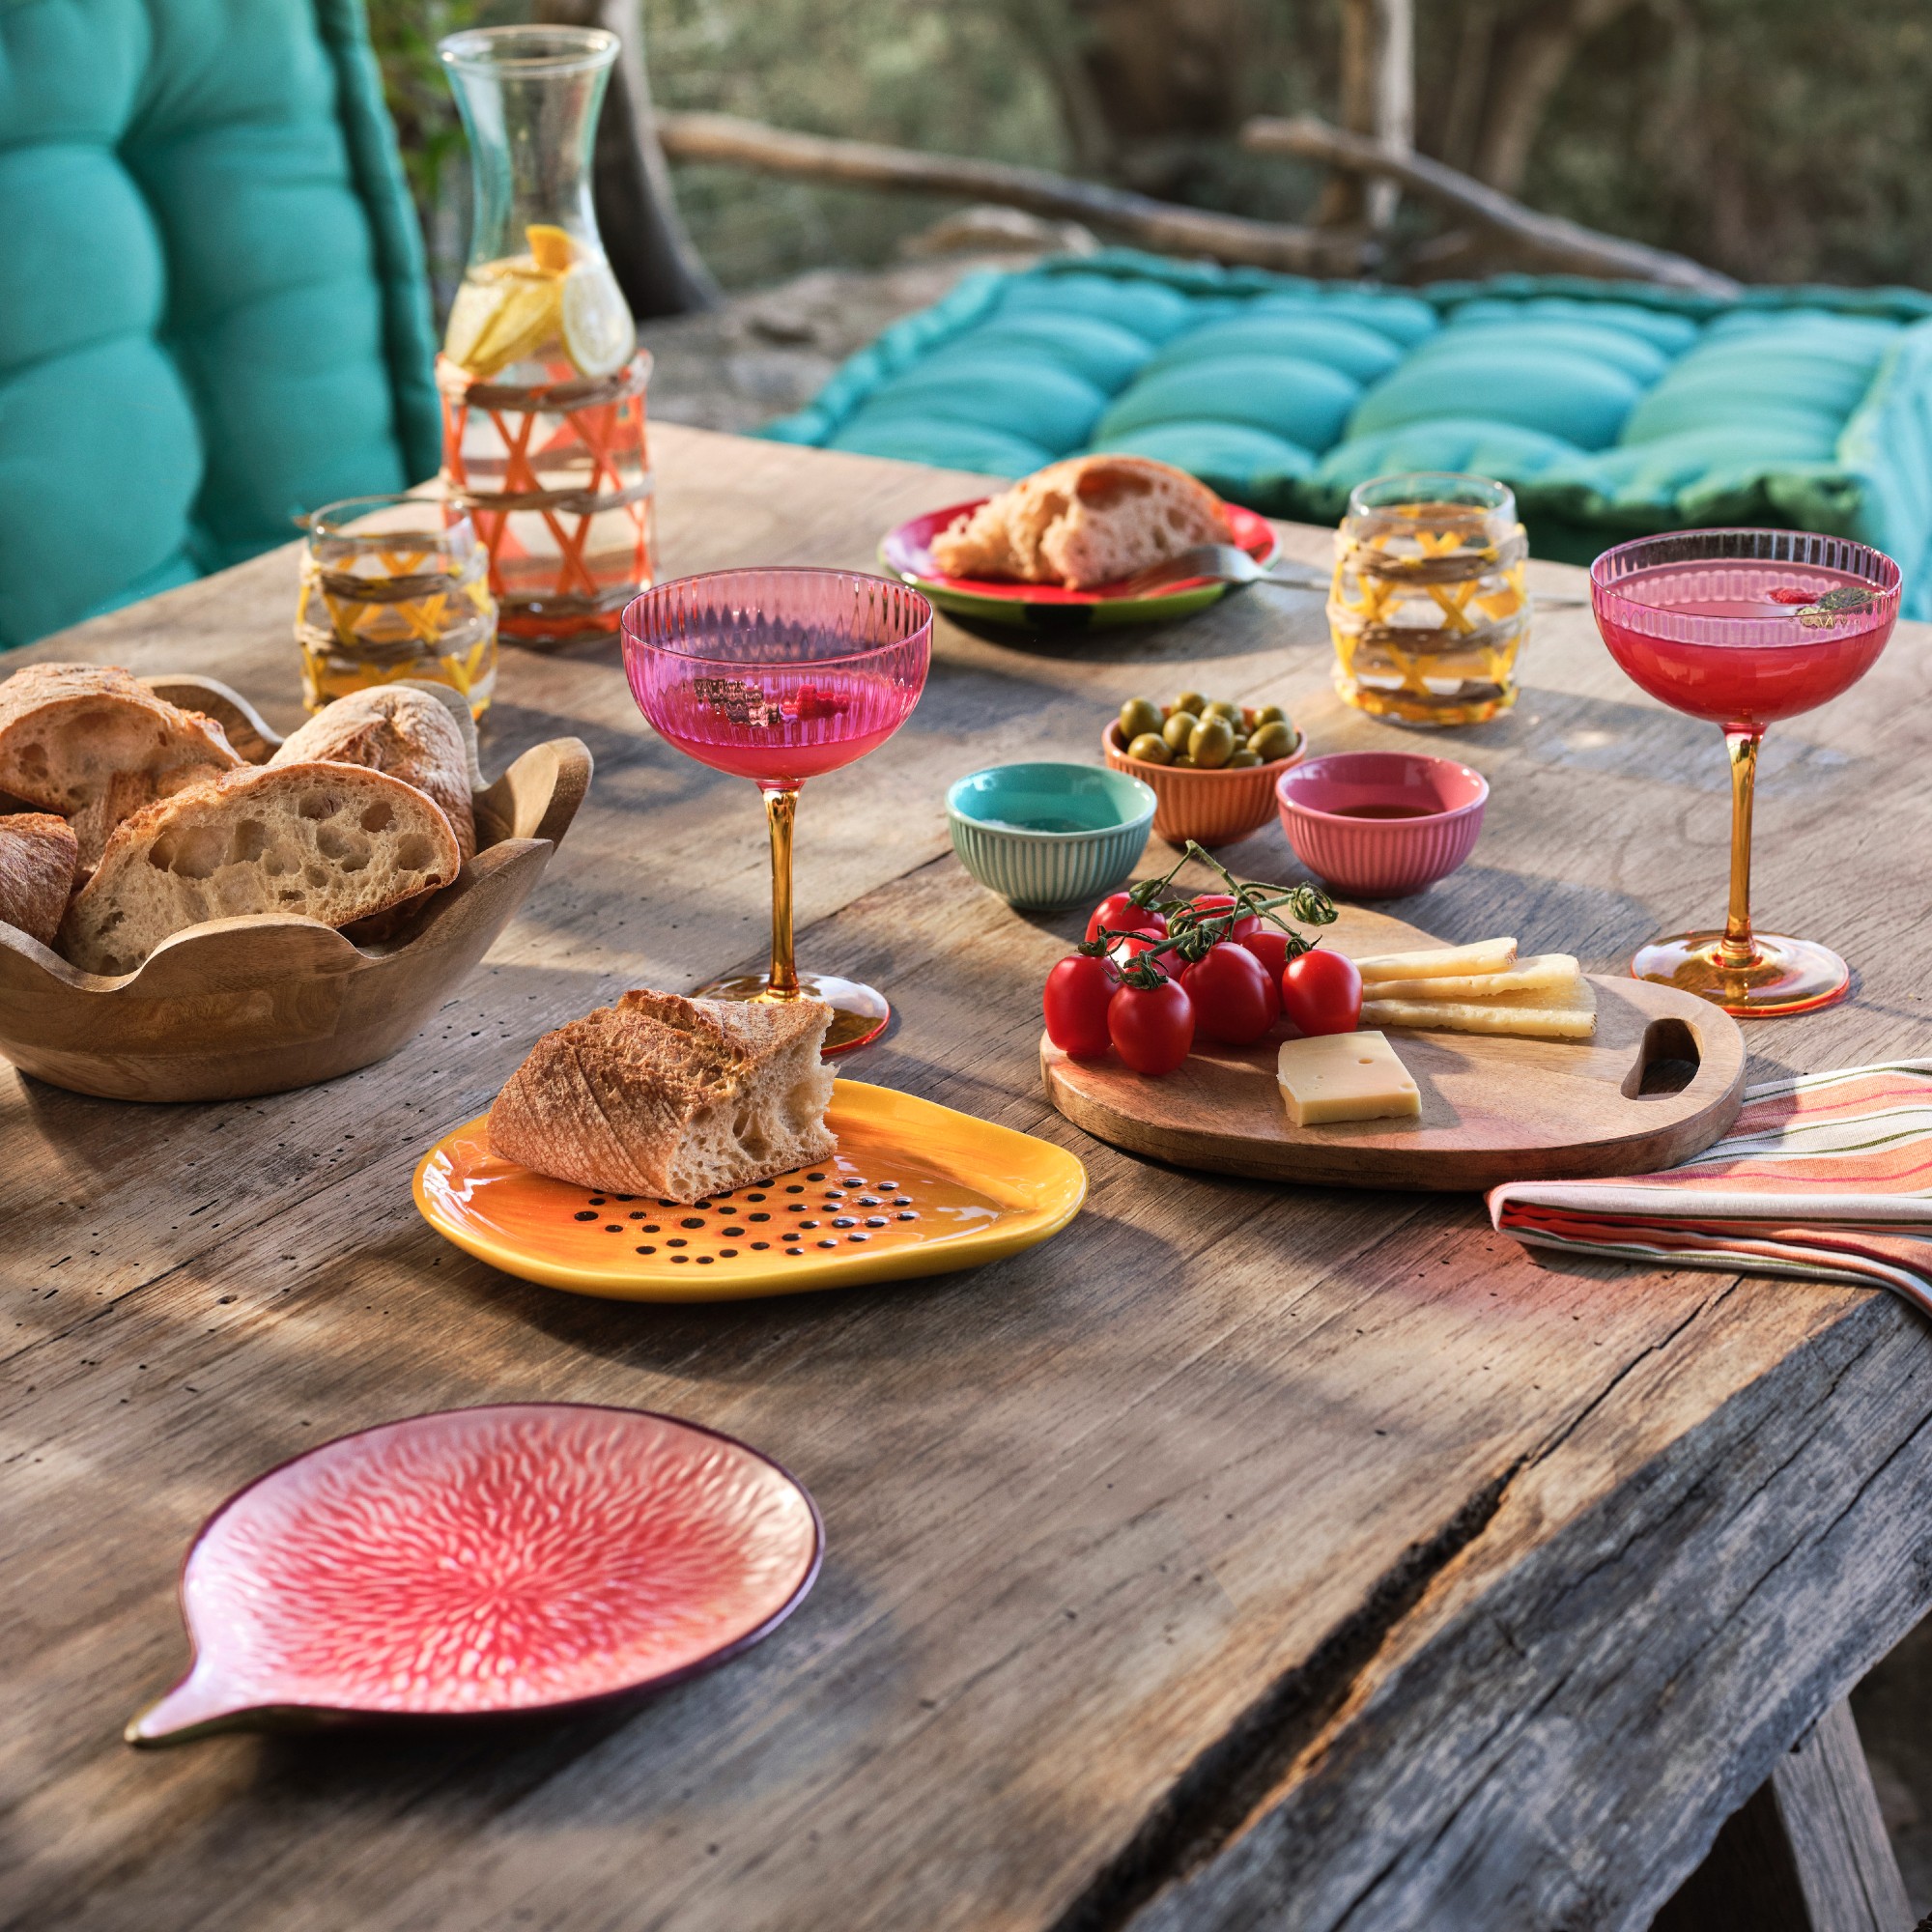 An outdoor table set with fruit tableware and food